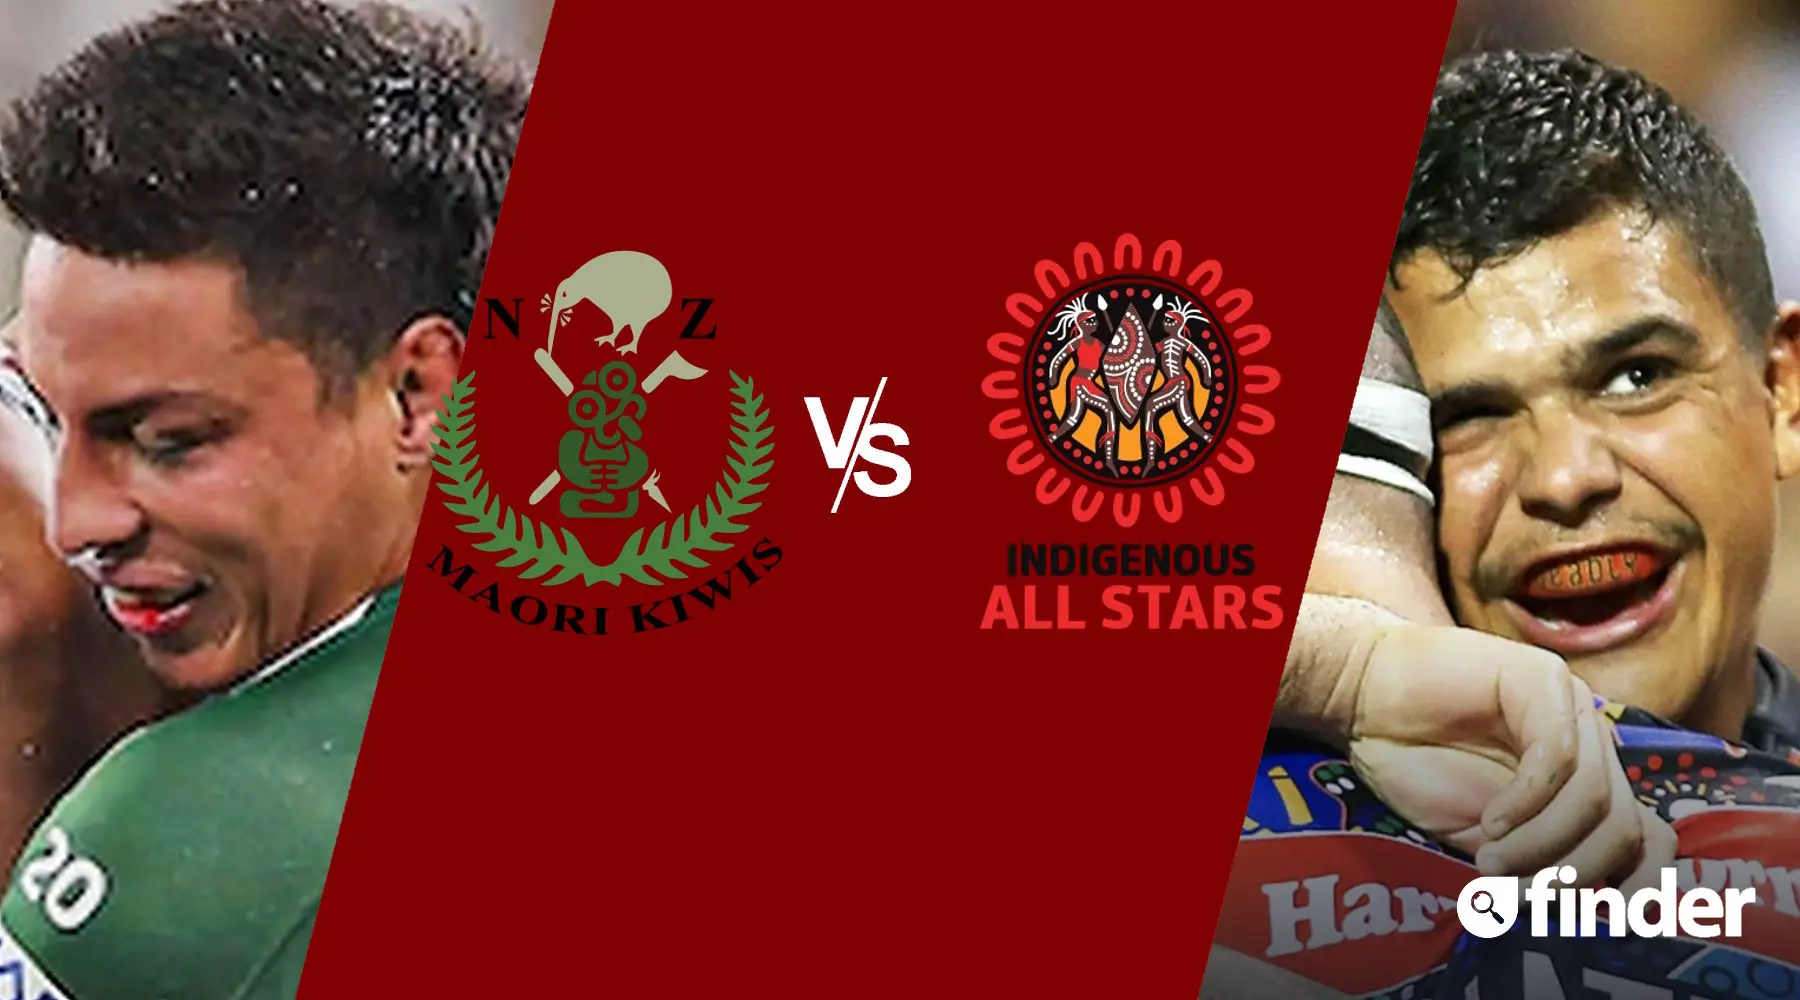 NRL All Stars How to watch Māori vs Indigenous live and free